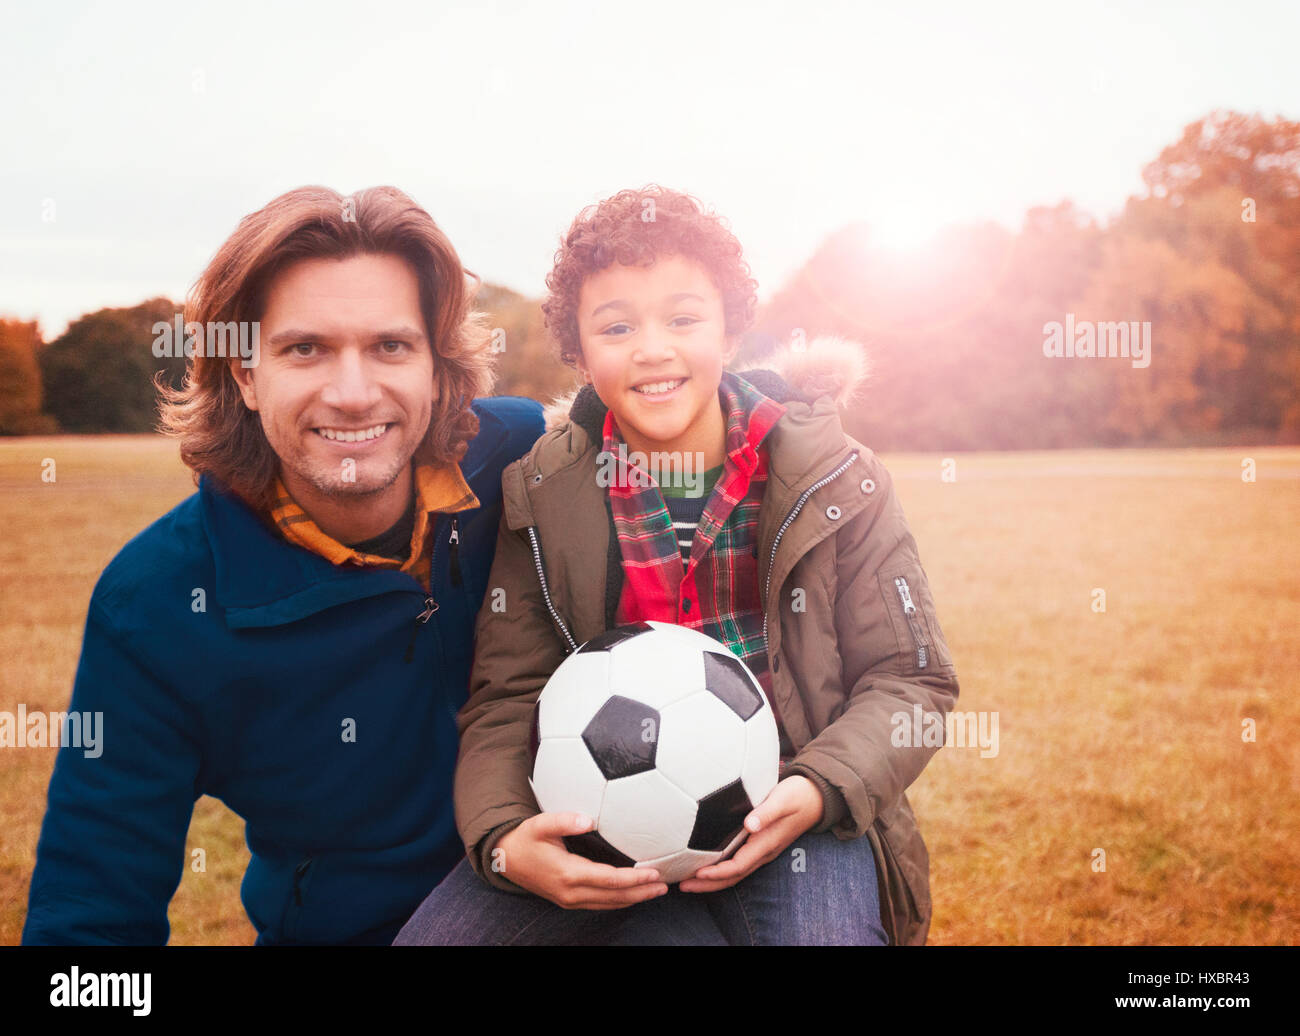 Portrait smiling father and son with soccer ball in park grass Stock Photo